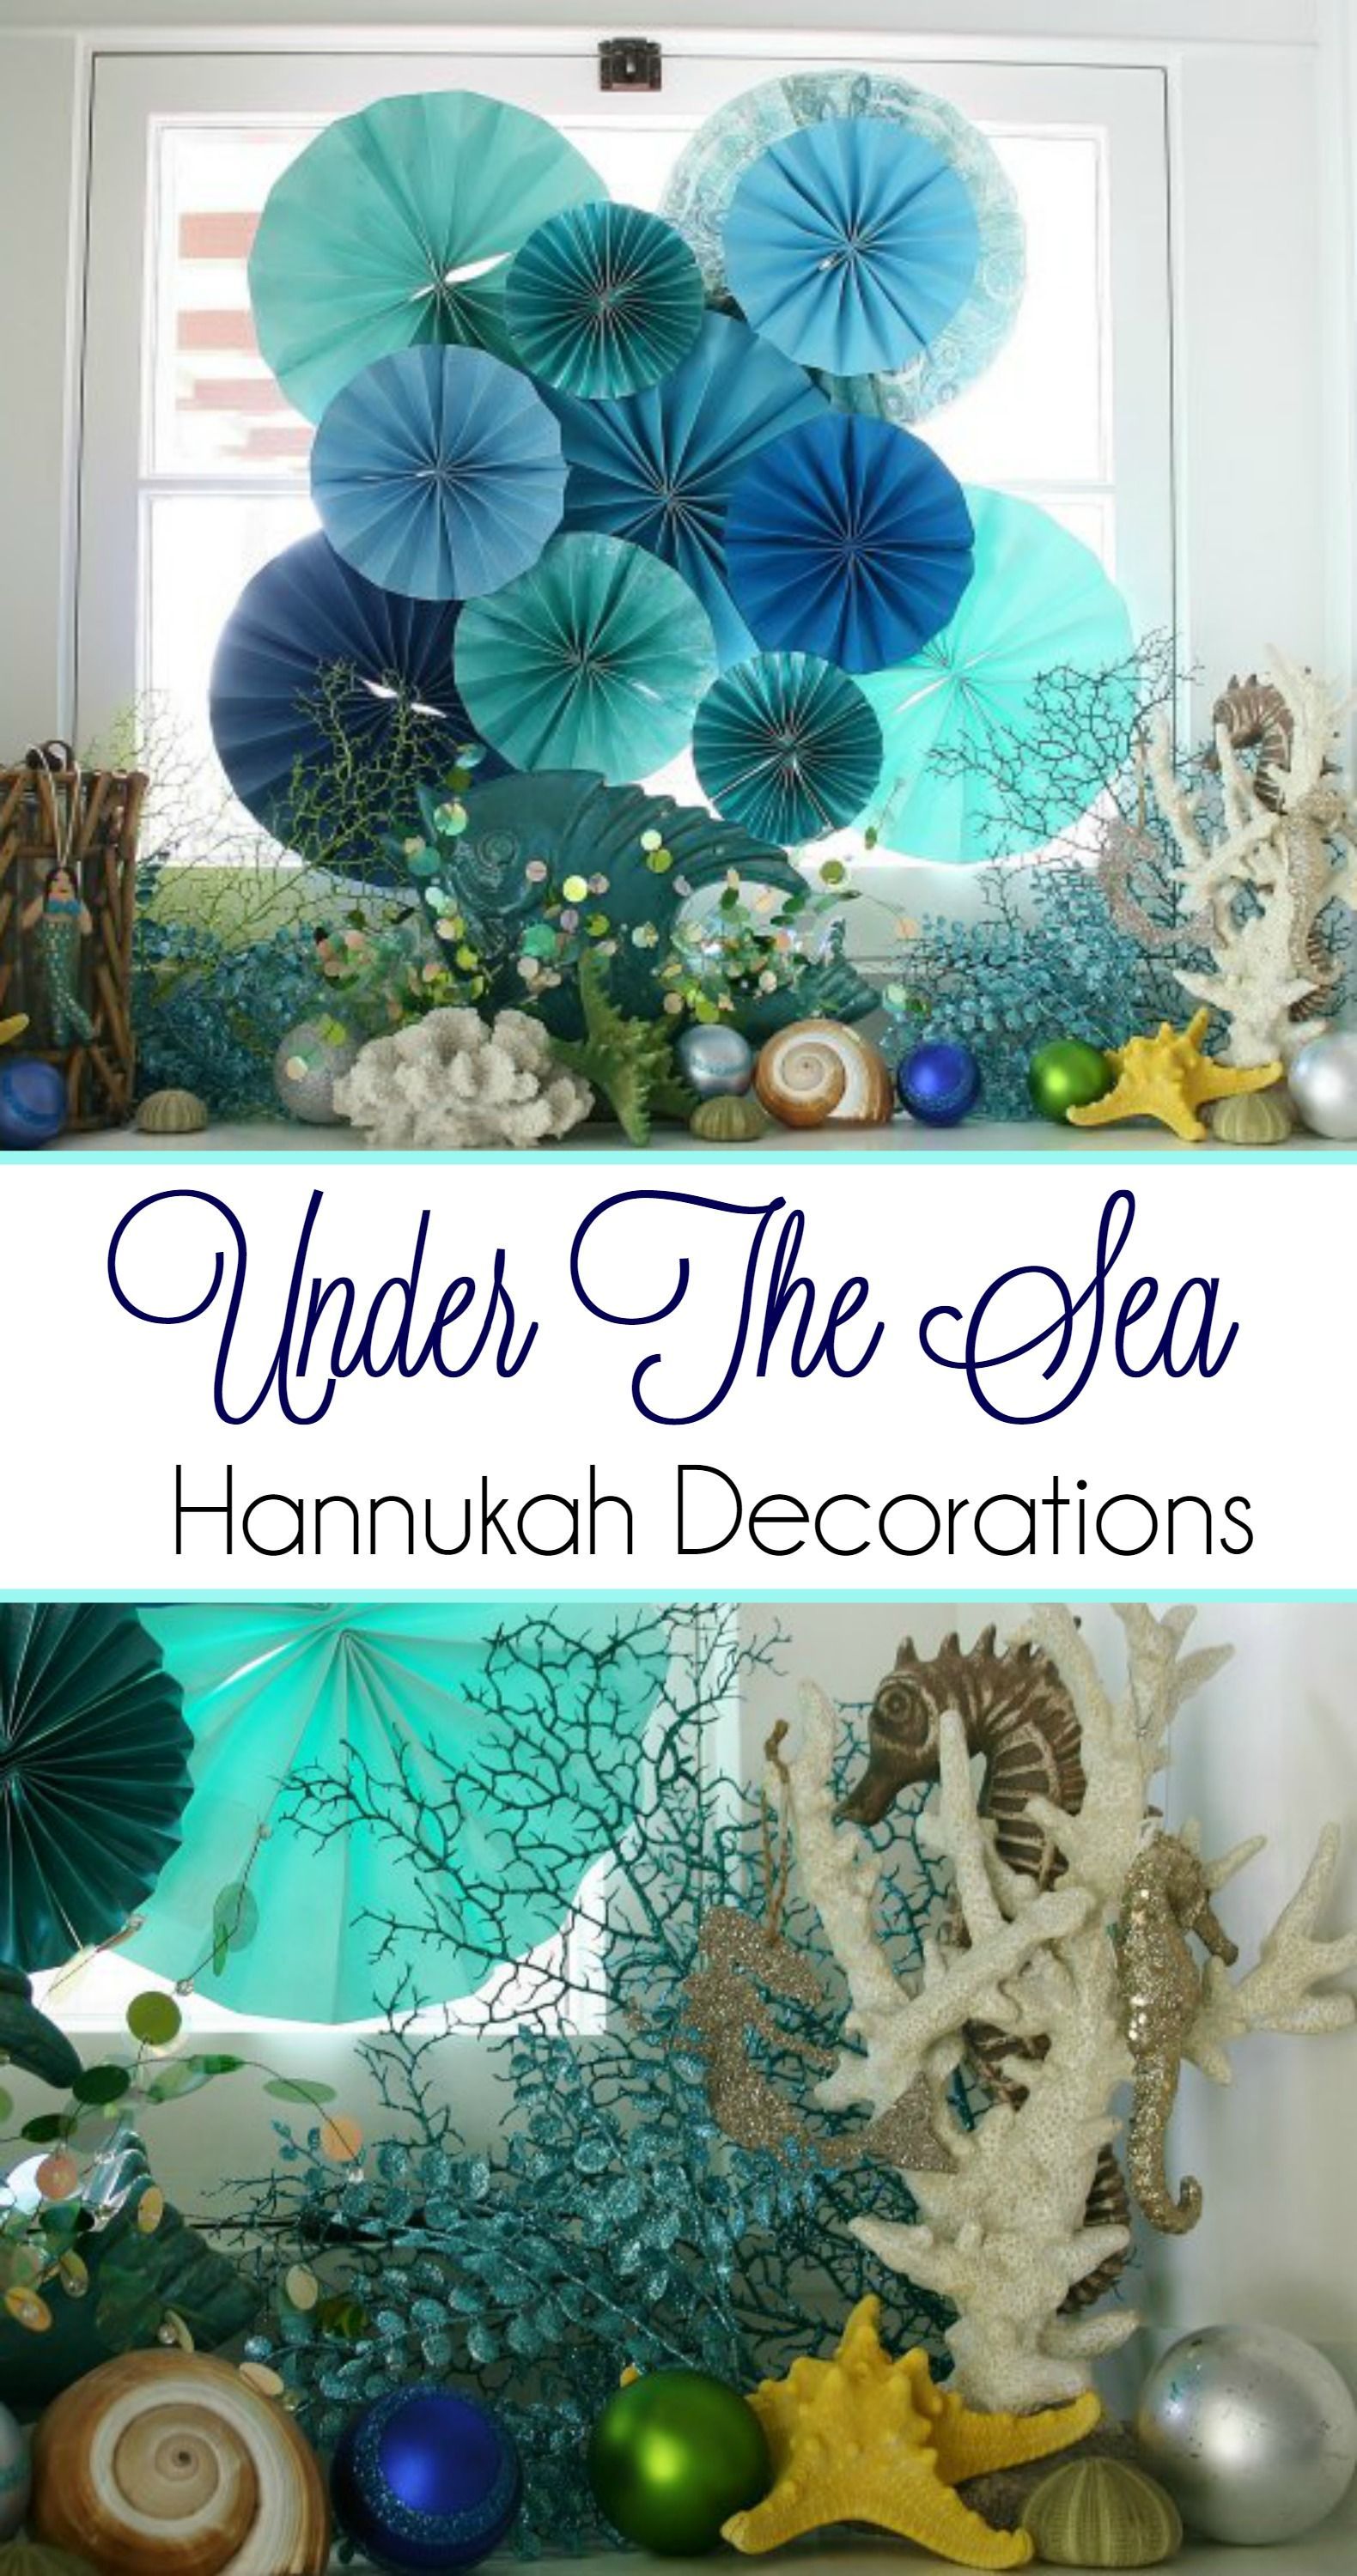 Be inspired by this “Under The Sea” themed Hanukkah. So many festive beachy touches!